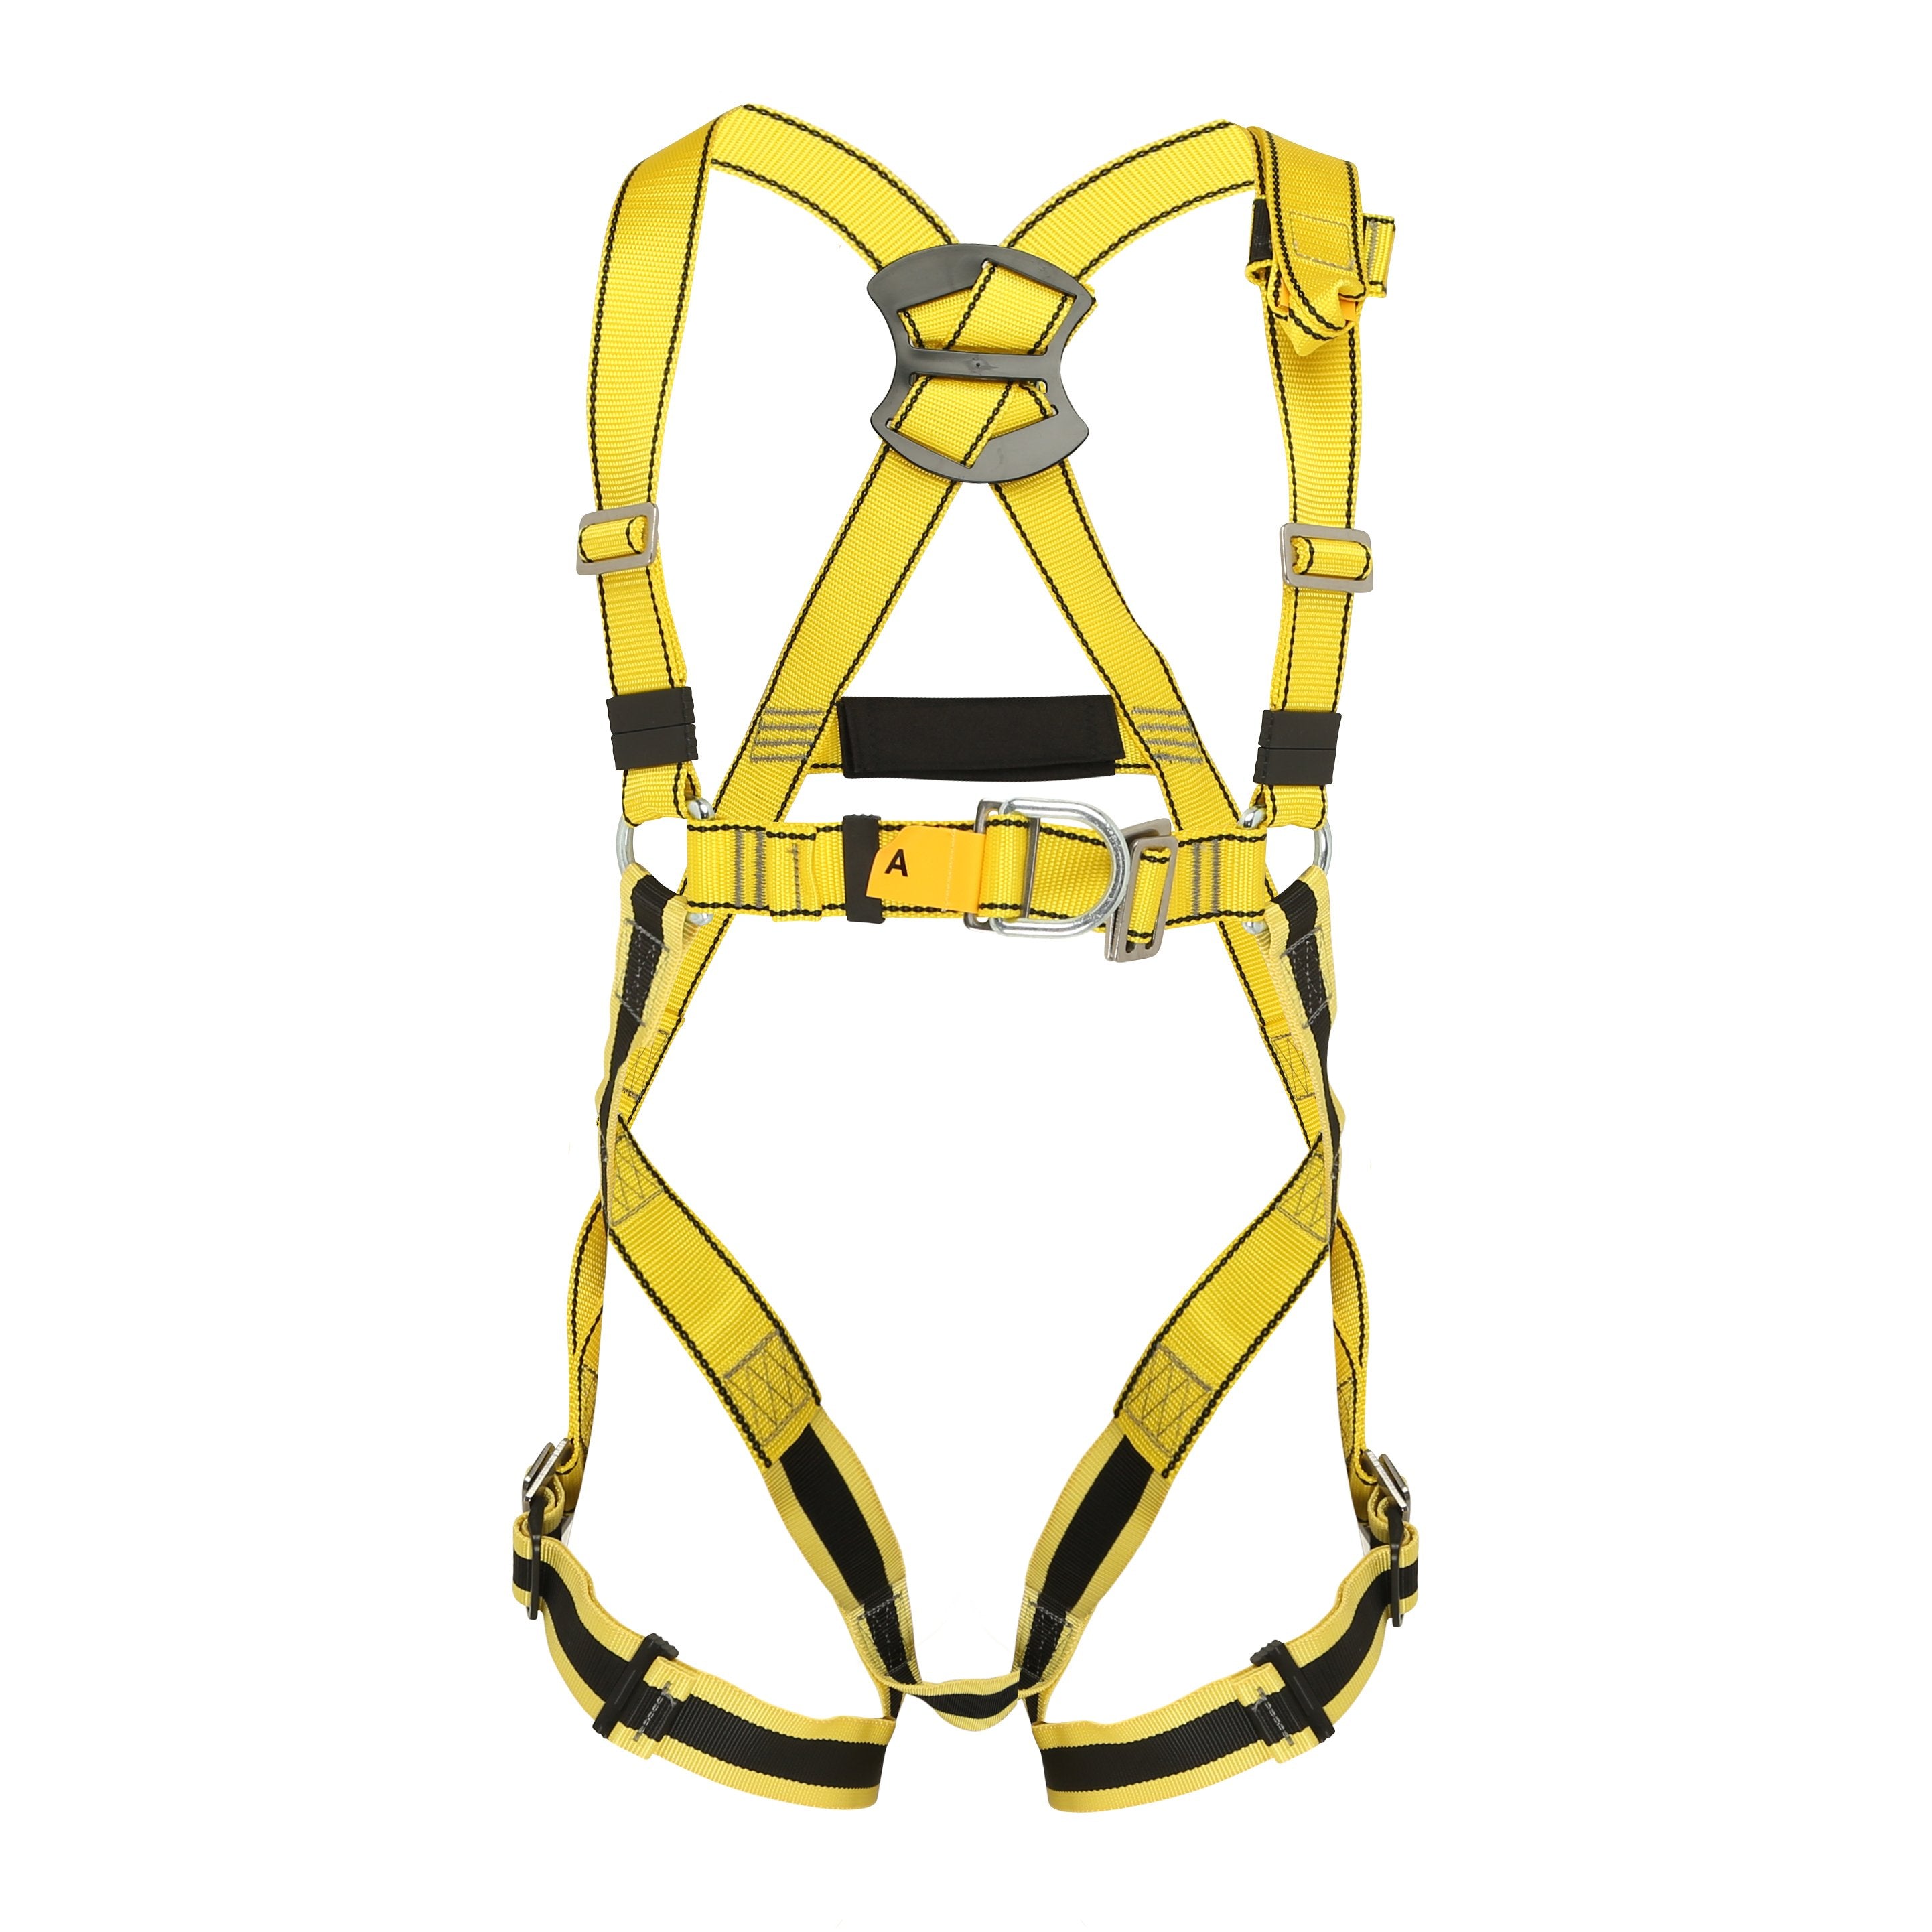 BIGBEN® Deluxe 2 Point Safety Harness - Full Body Fall Arrest Harness with  Adjustable Straps